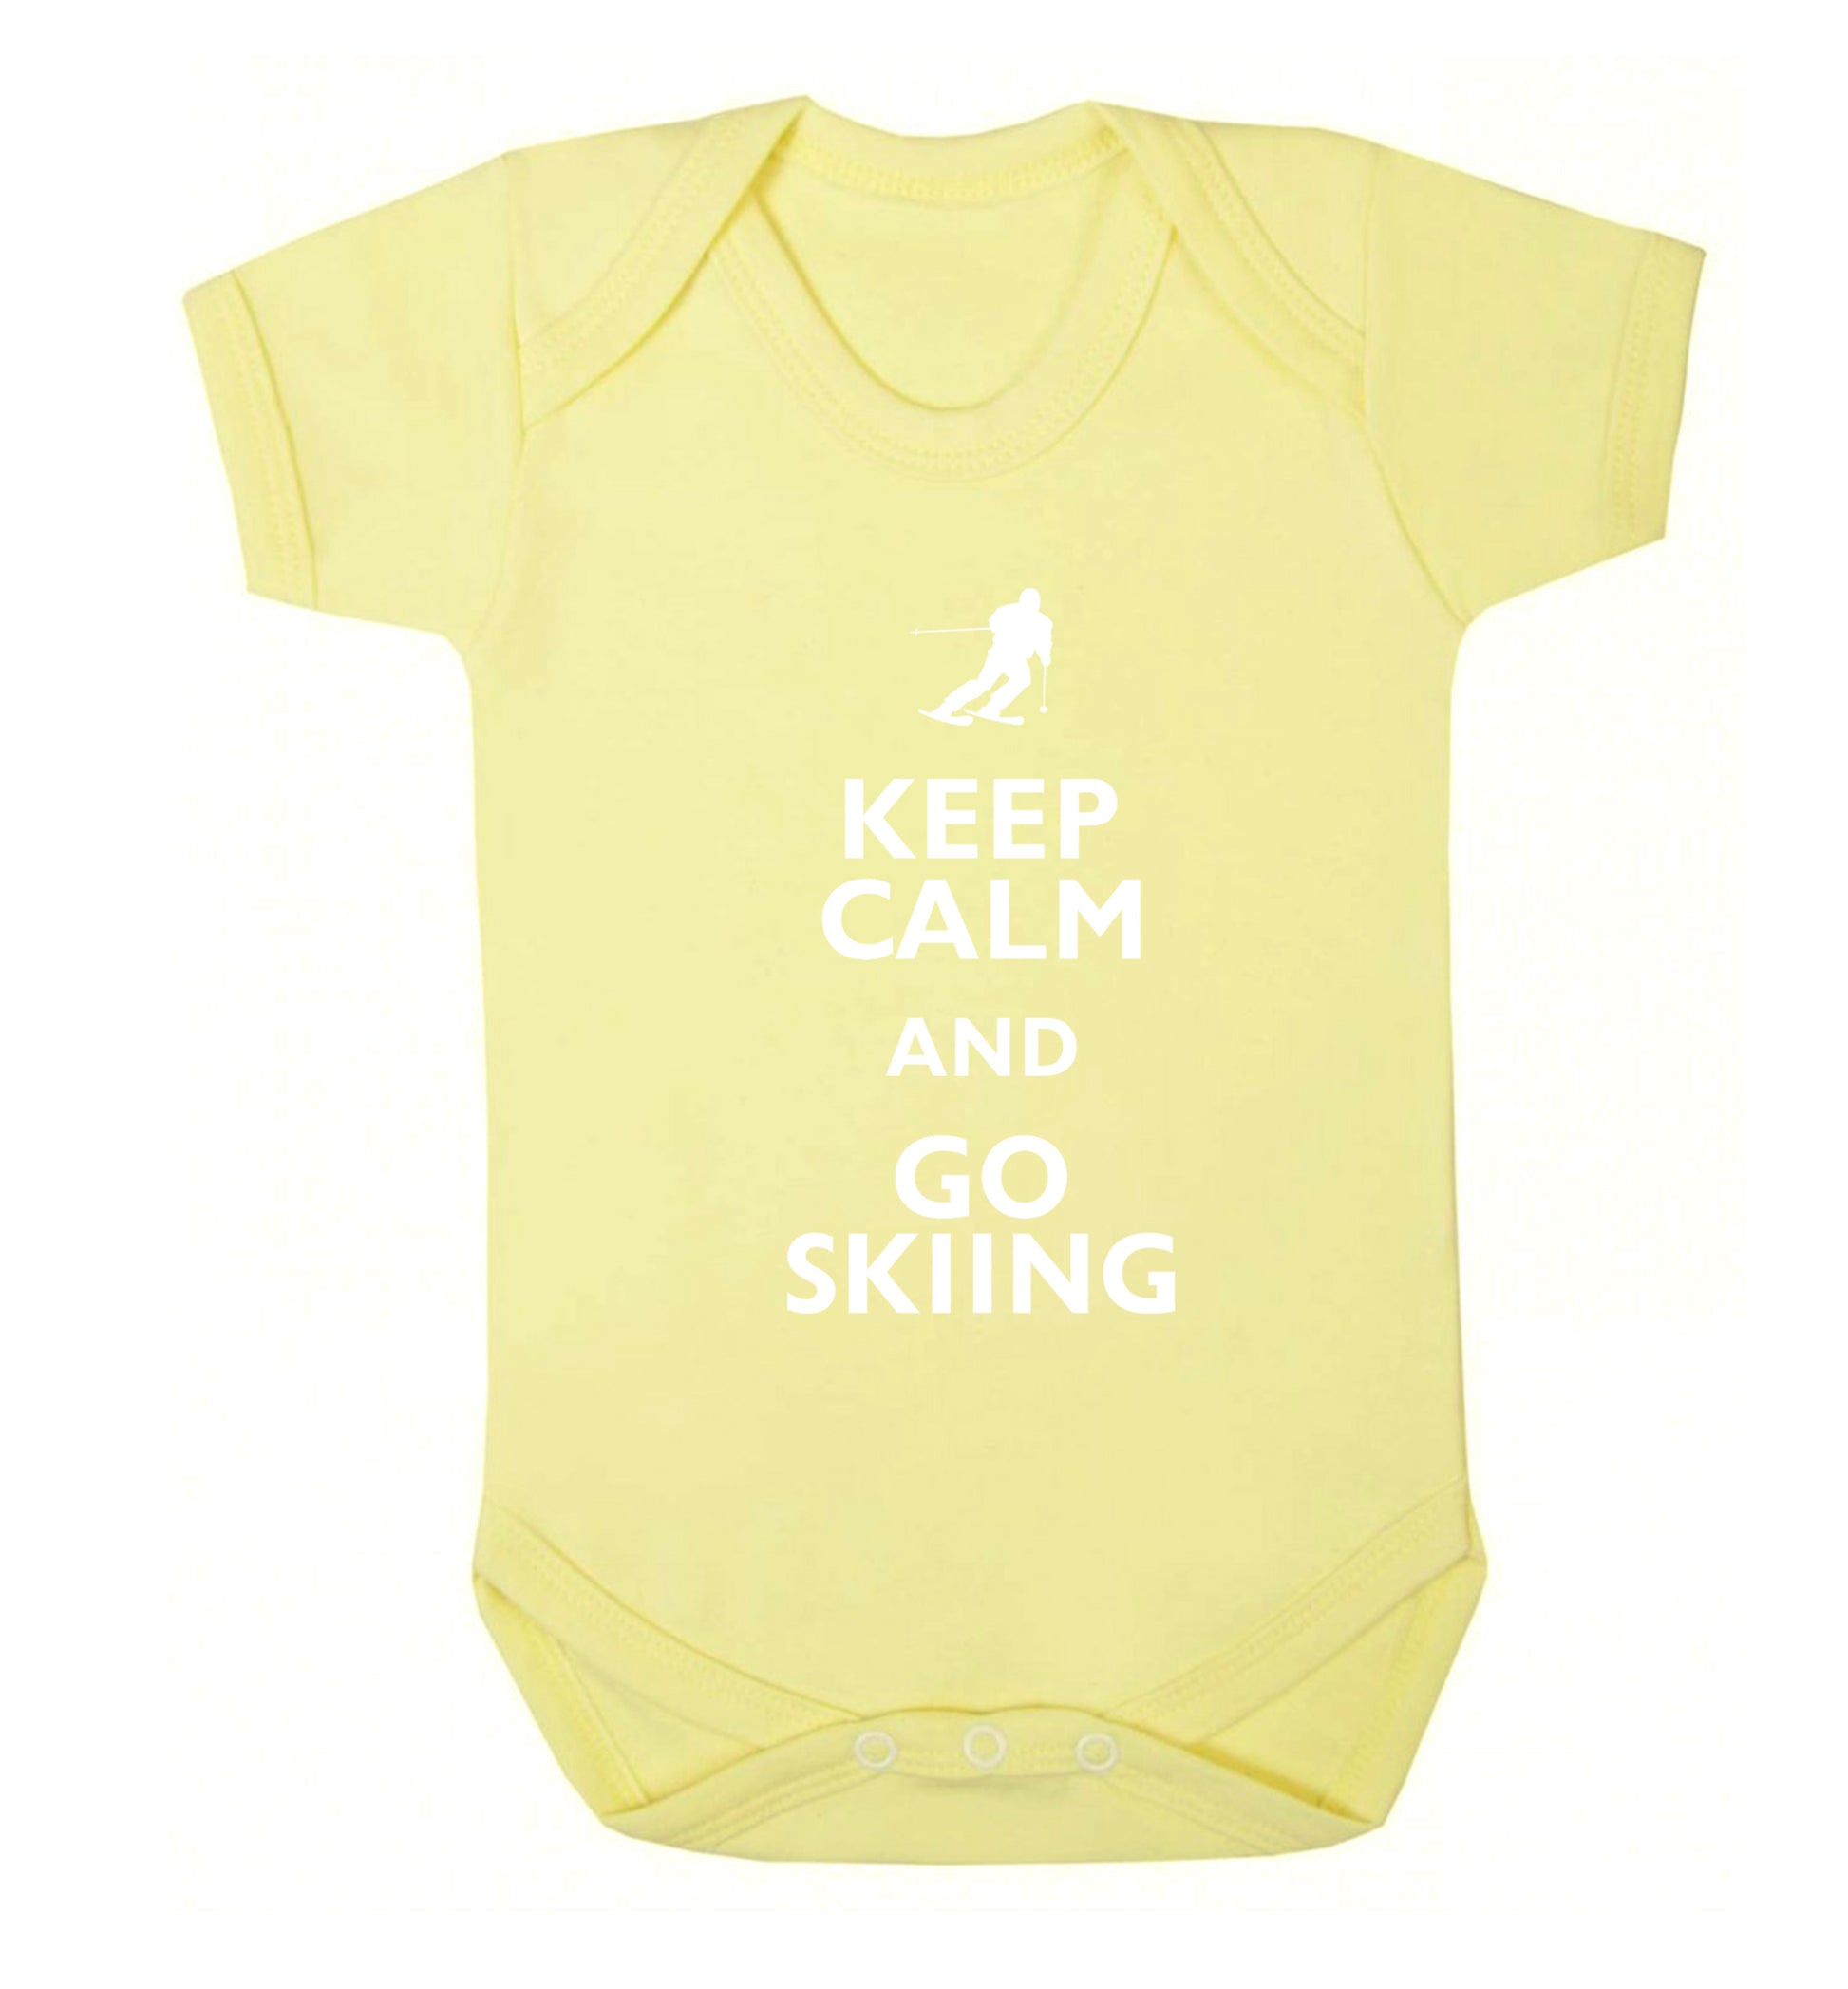 Keep calm and go skiing Baby Vest pale yellow 18-24 months